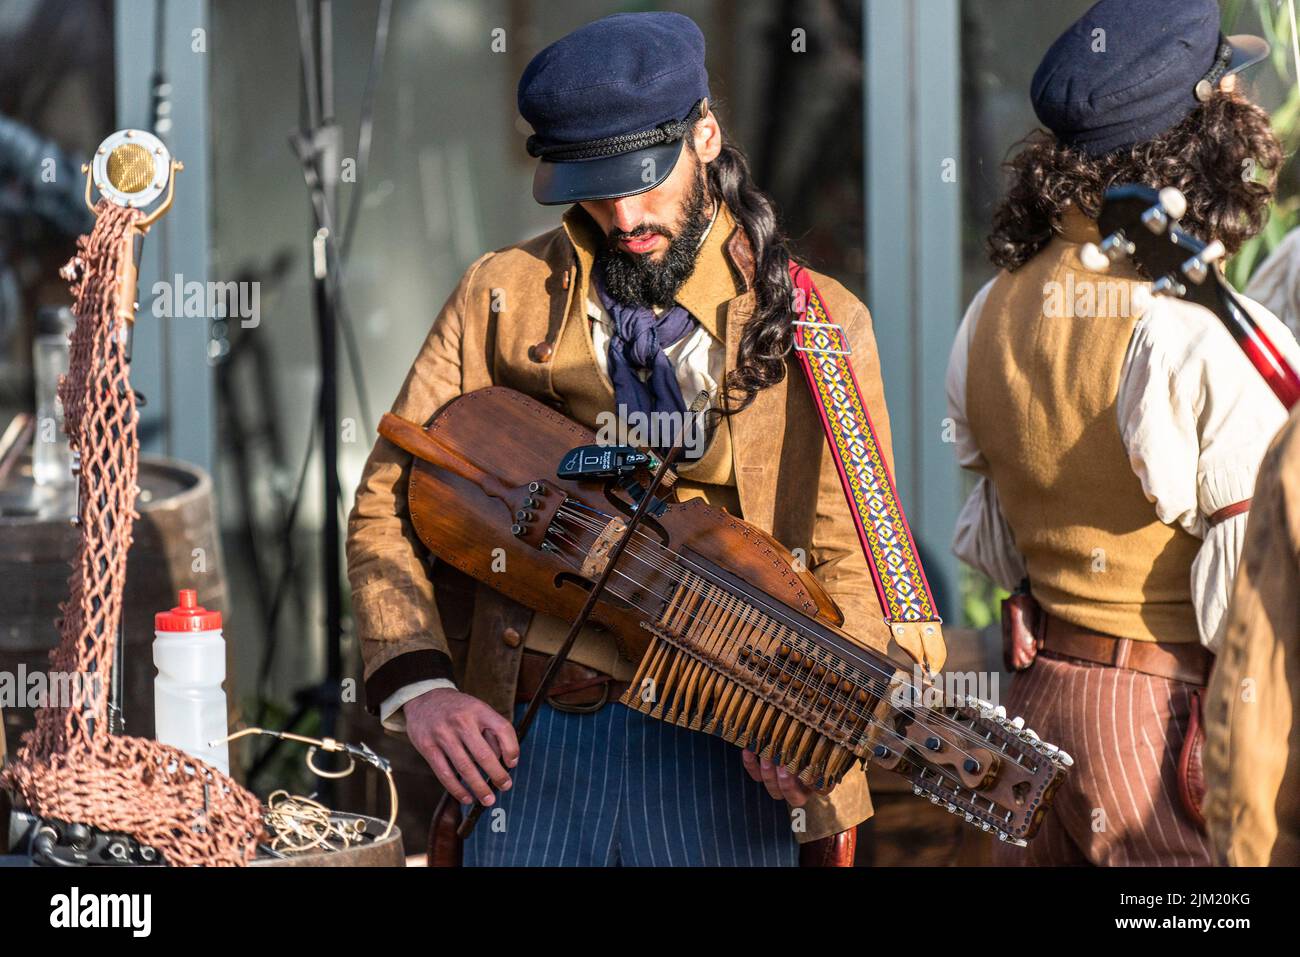 A musician from The Old Time Sailors tuning a nyckelharpa at the Newquay Orchard amphitheatre in Cornwall. Stock Photo